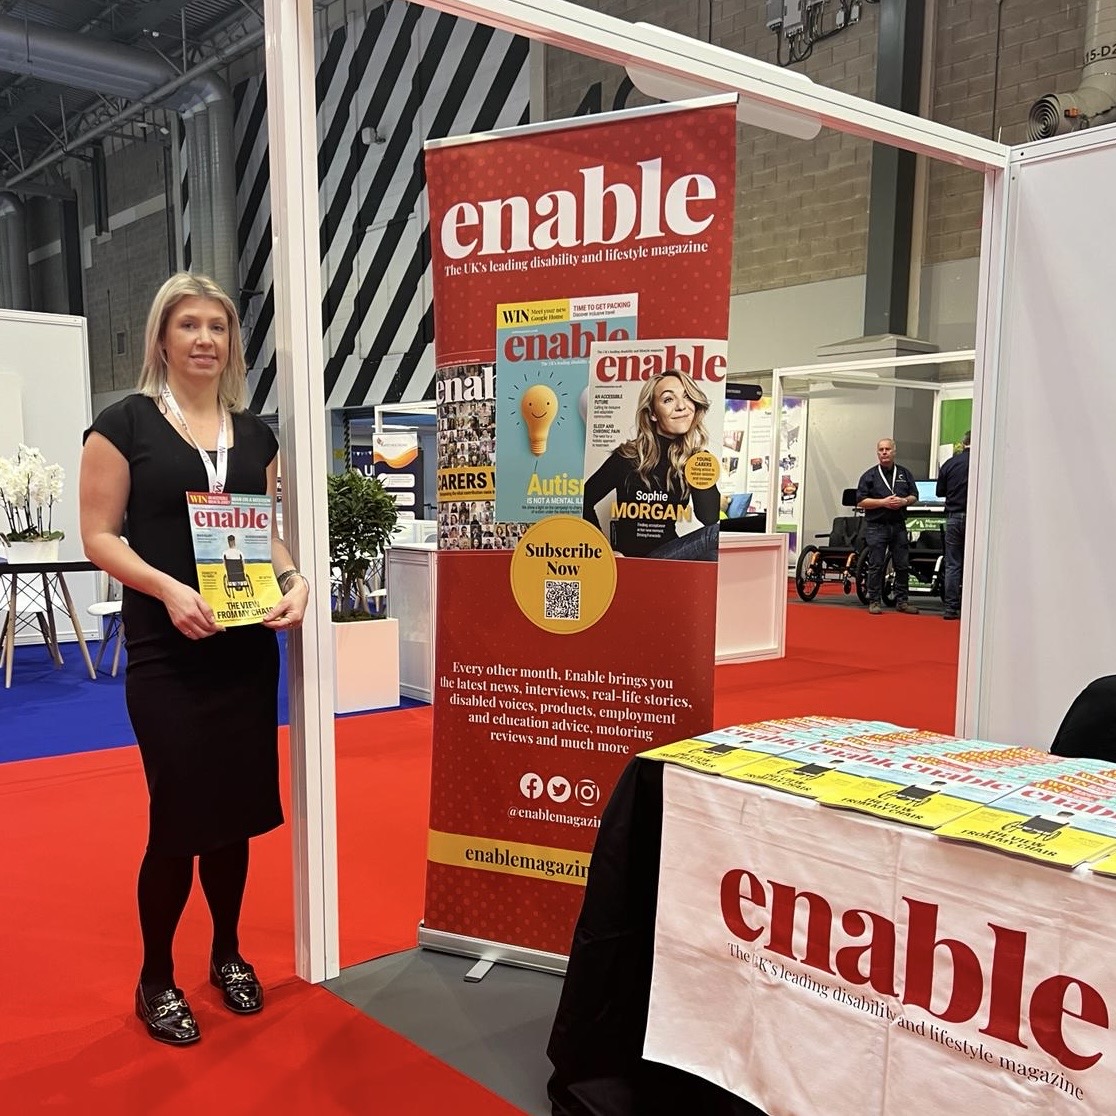 We’re set up and ready to go at @NaidexShow 🥳🥳 Come say hello and pick up your free copy of @enablemagazine at stand #G72! #Naidex #disabilityevent